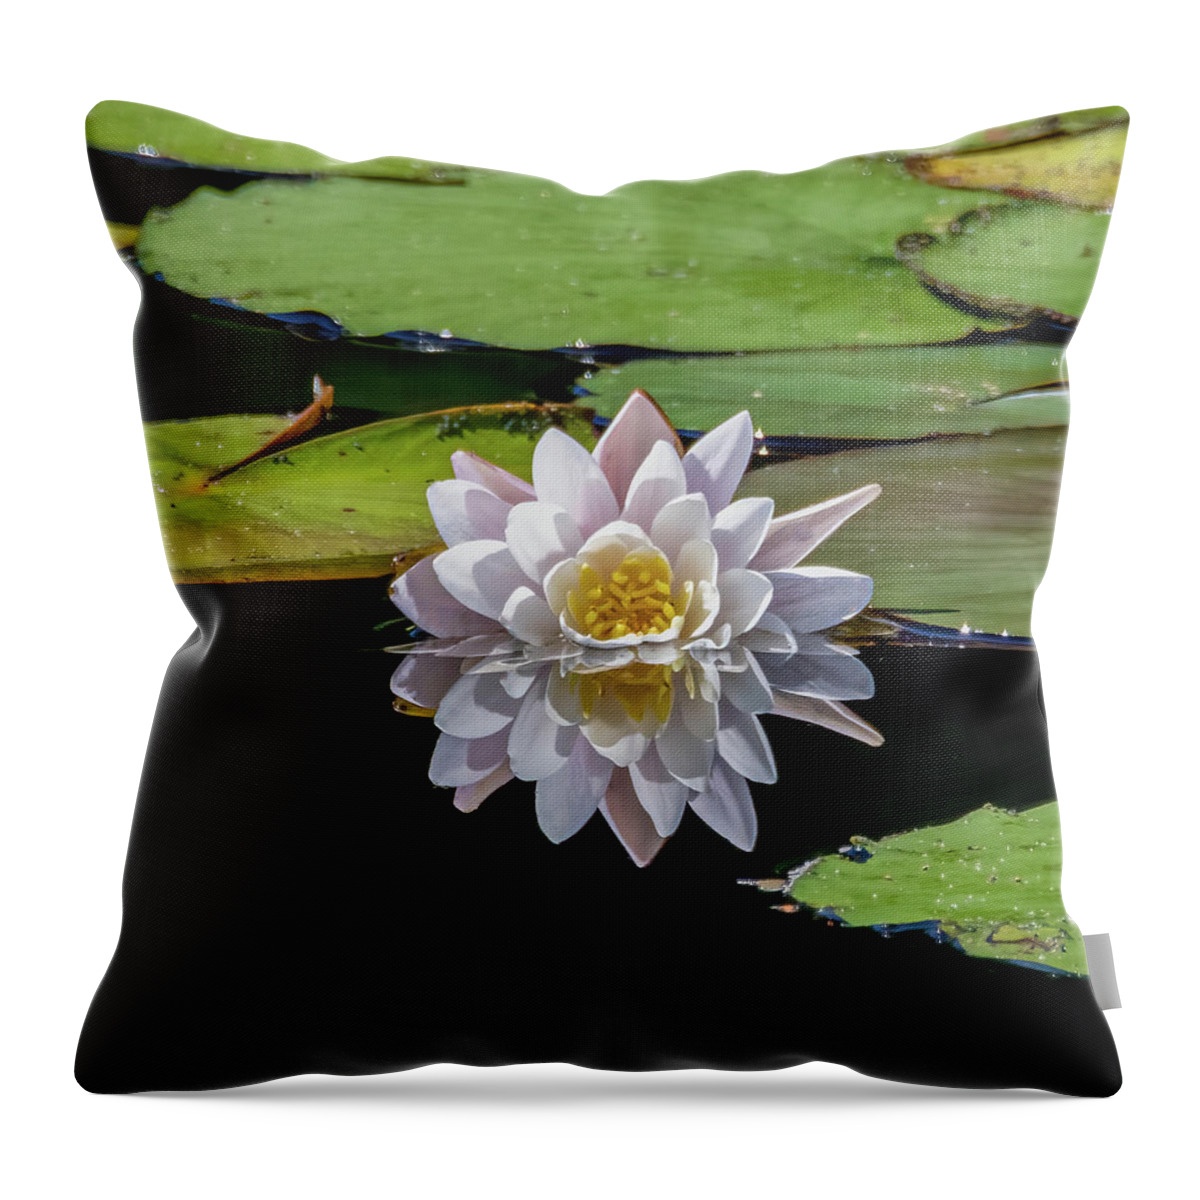 Aquatic Throw Pillow featuring the photograph Lily Reflection by Brian Shoemaker